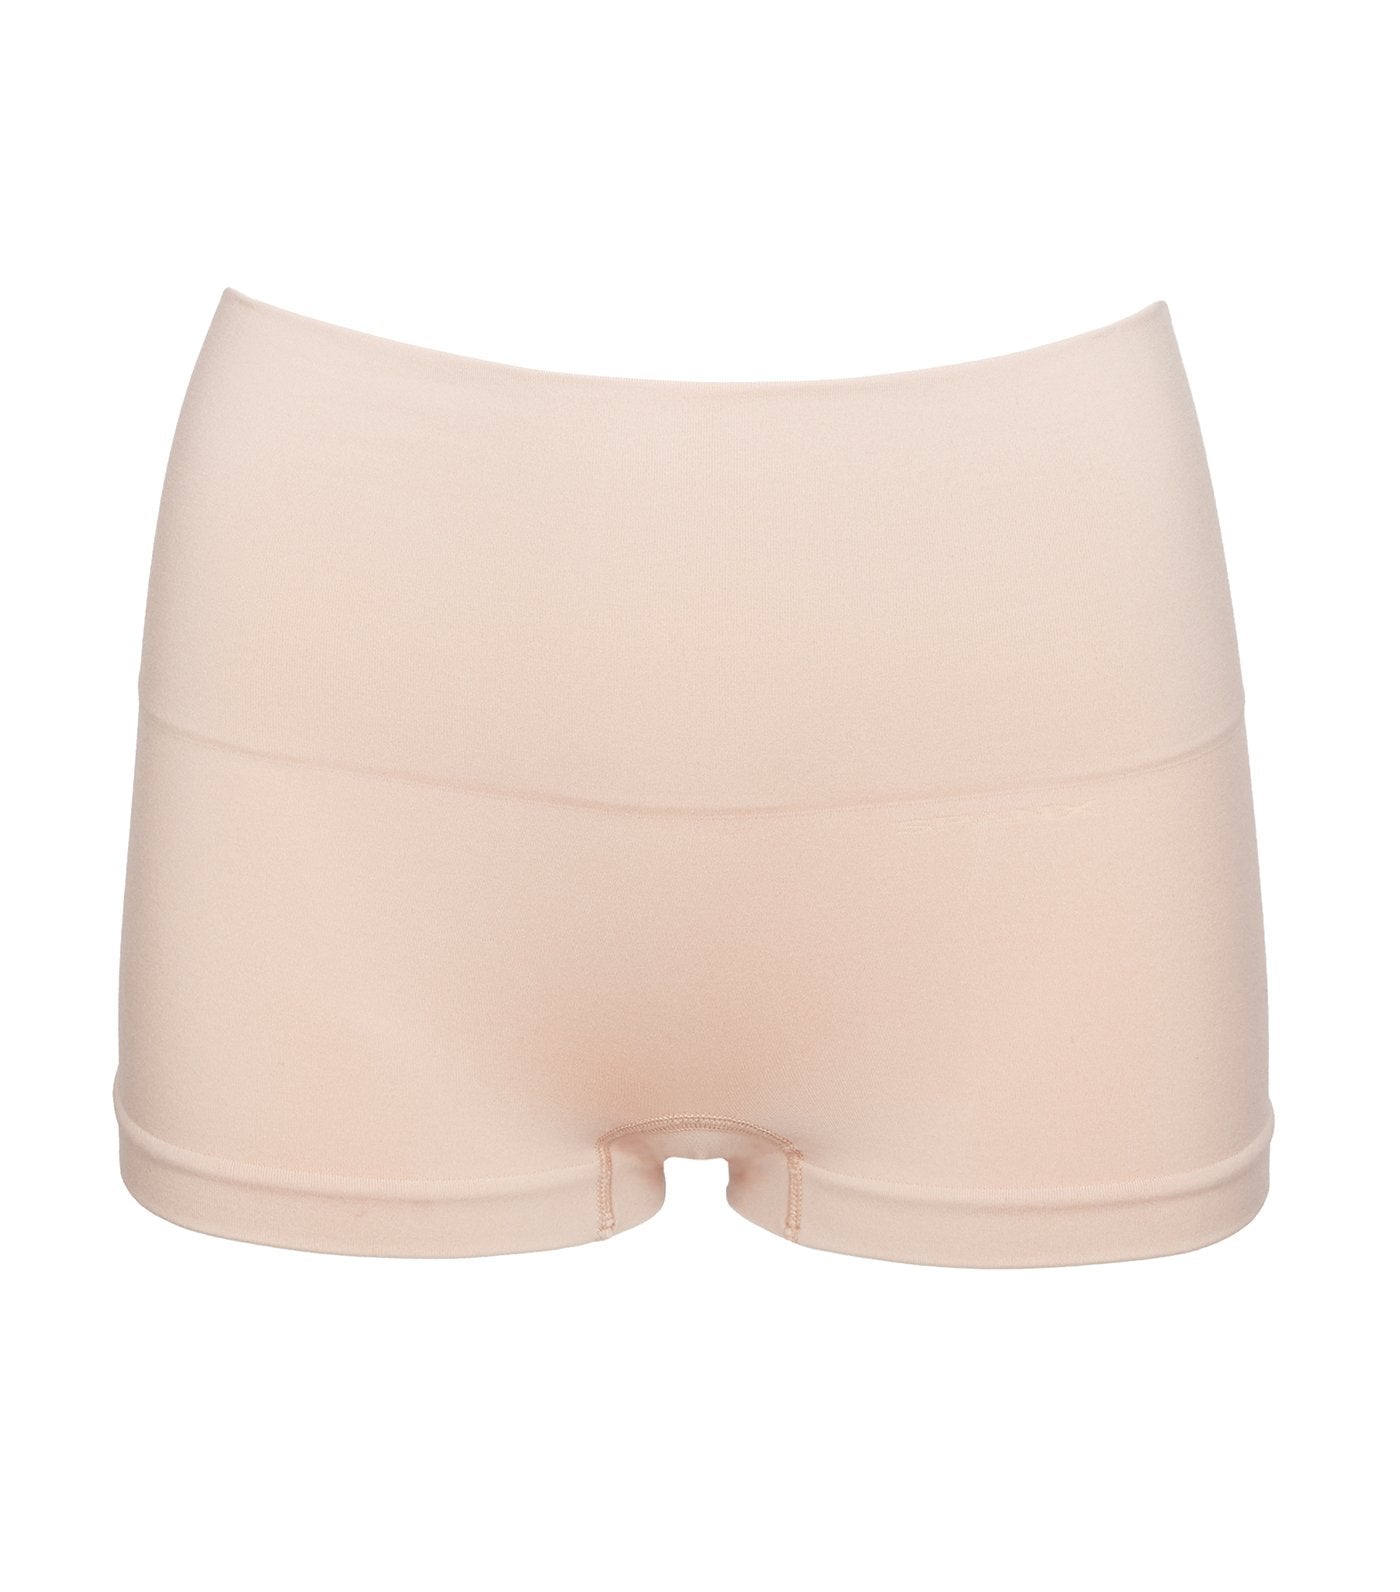 Spanx Curve Seamless Shaping boyshort in beige